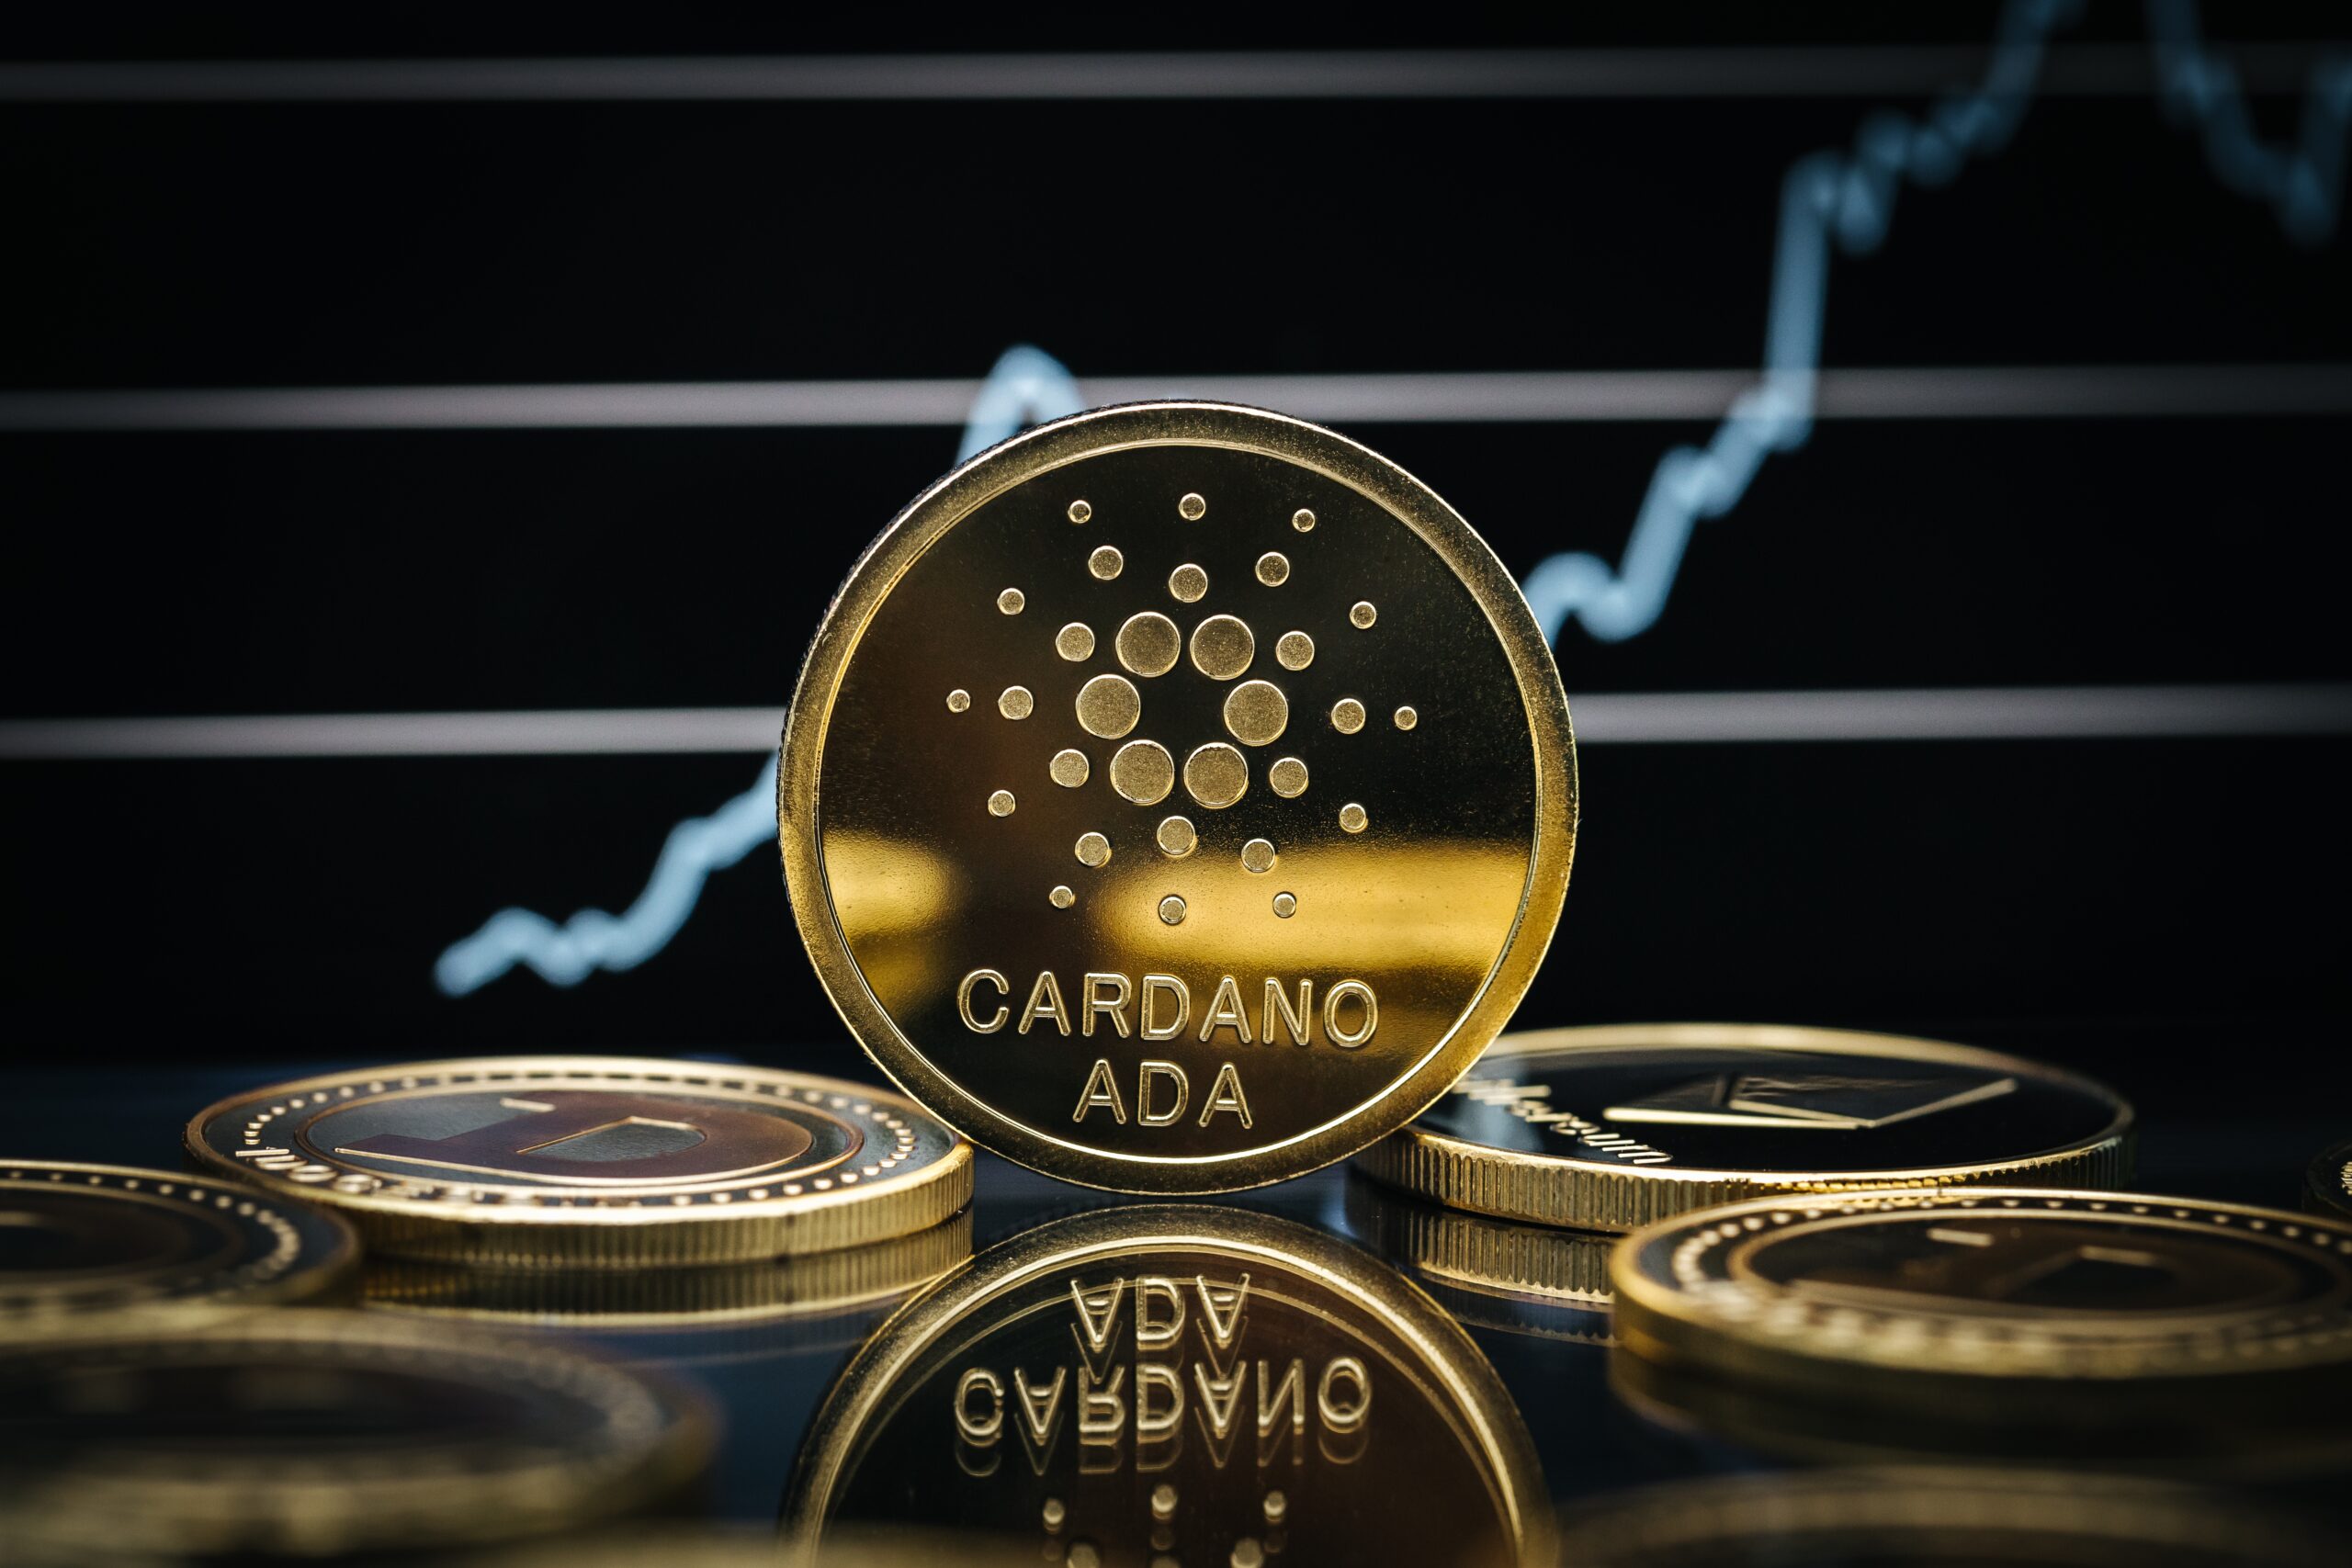 Cardano Outshines Ethereum in Developer Commitments